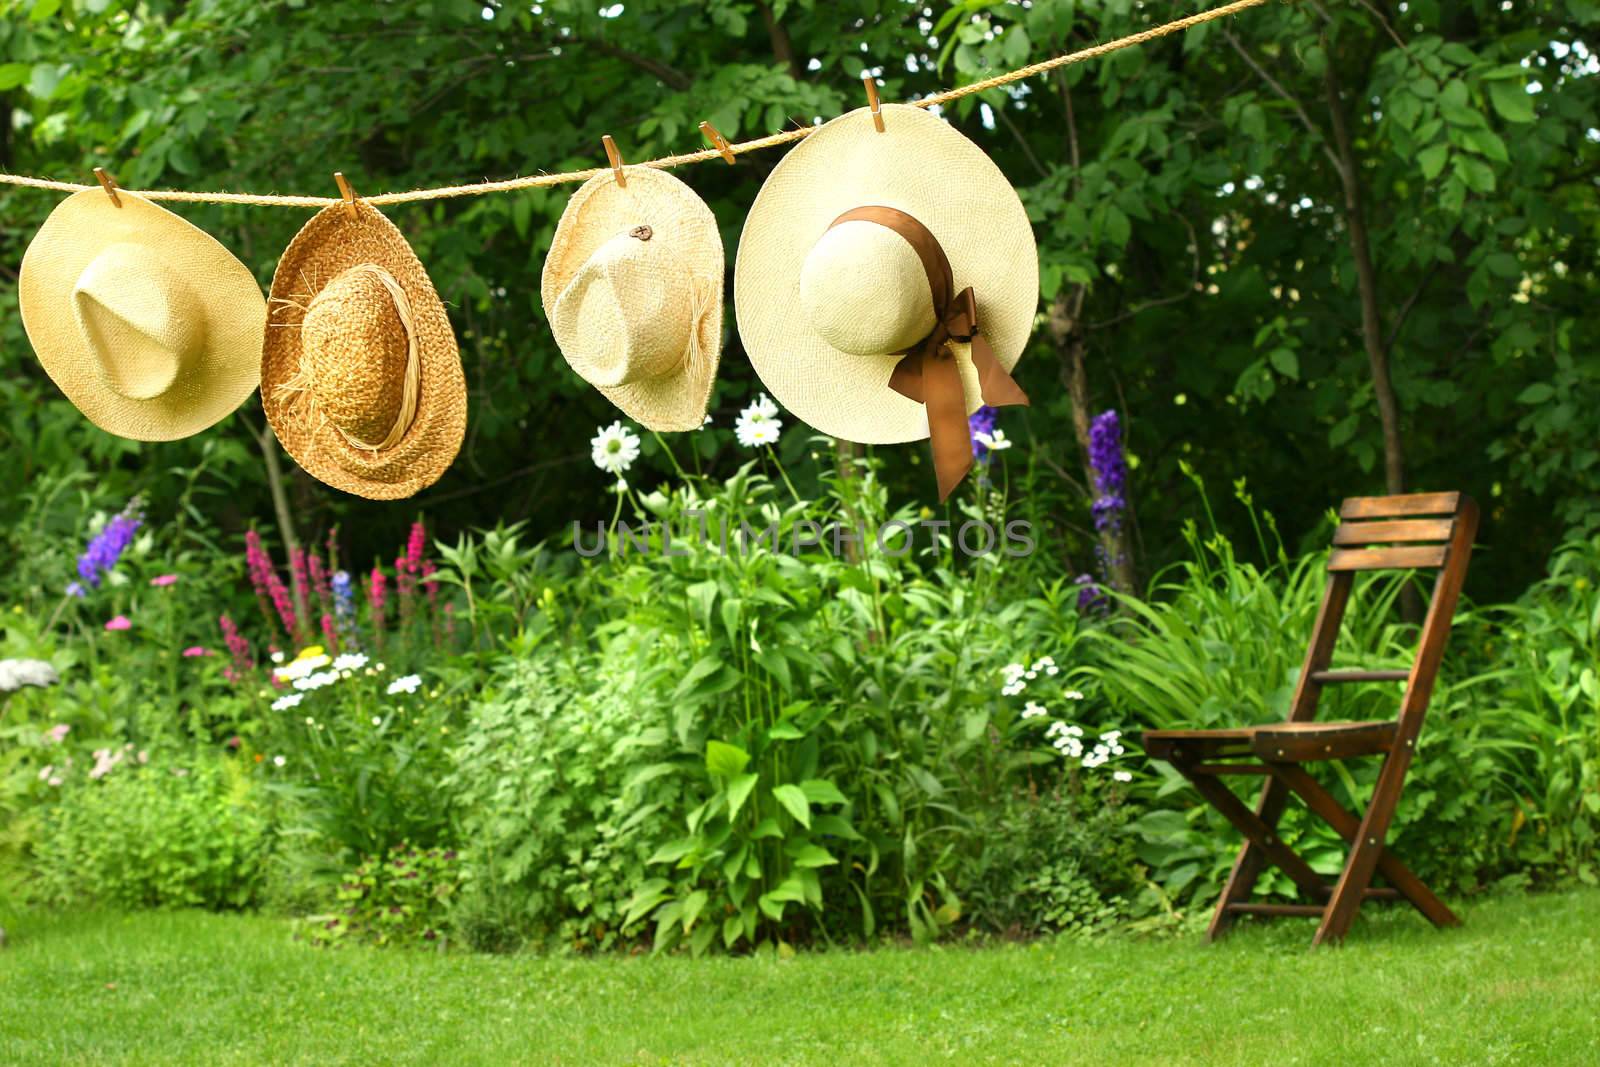 Summer straw hats hanging on clothesline by Sandralise